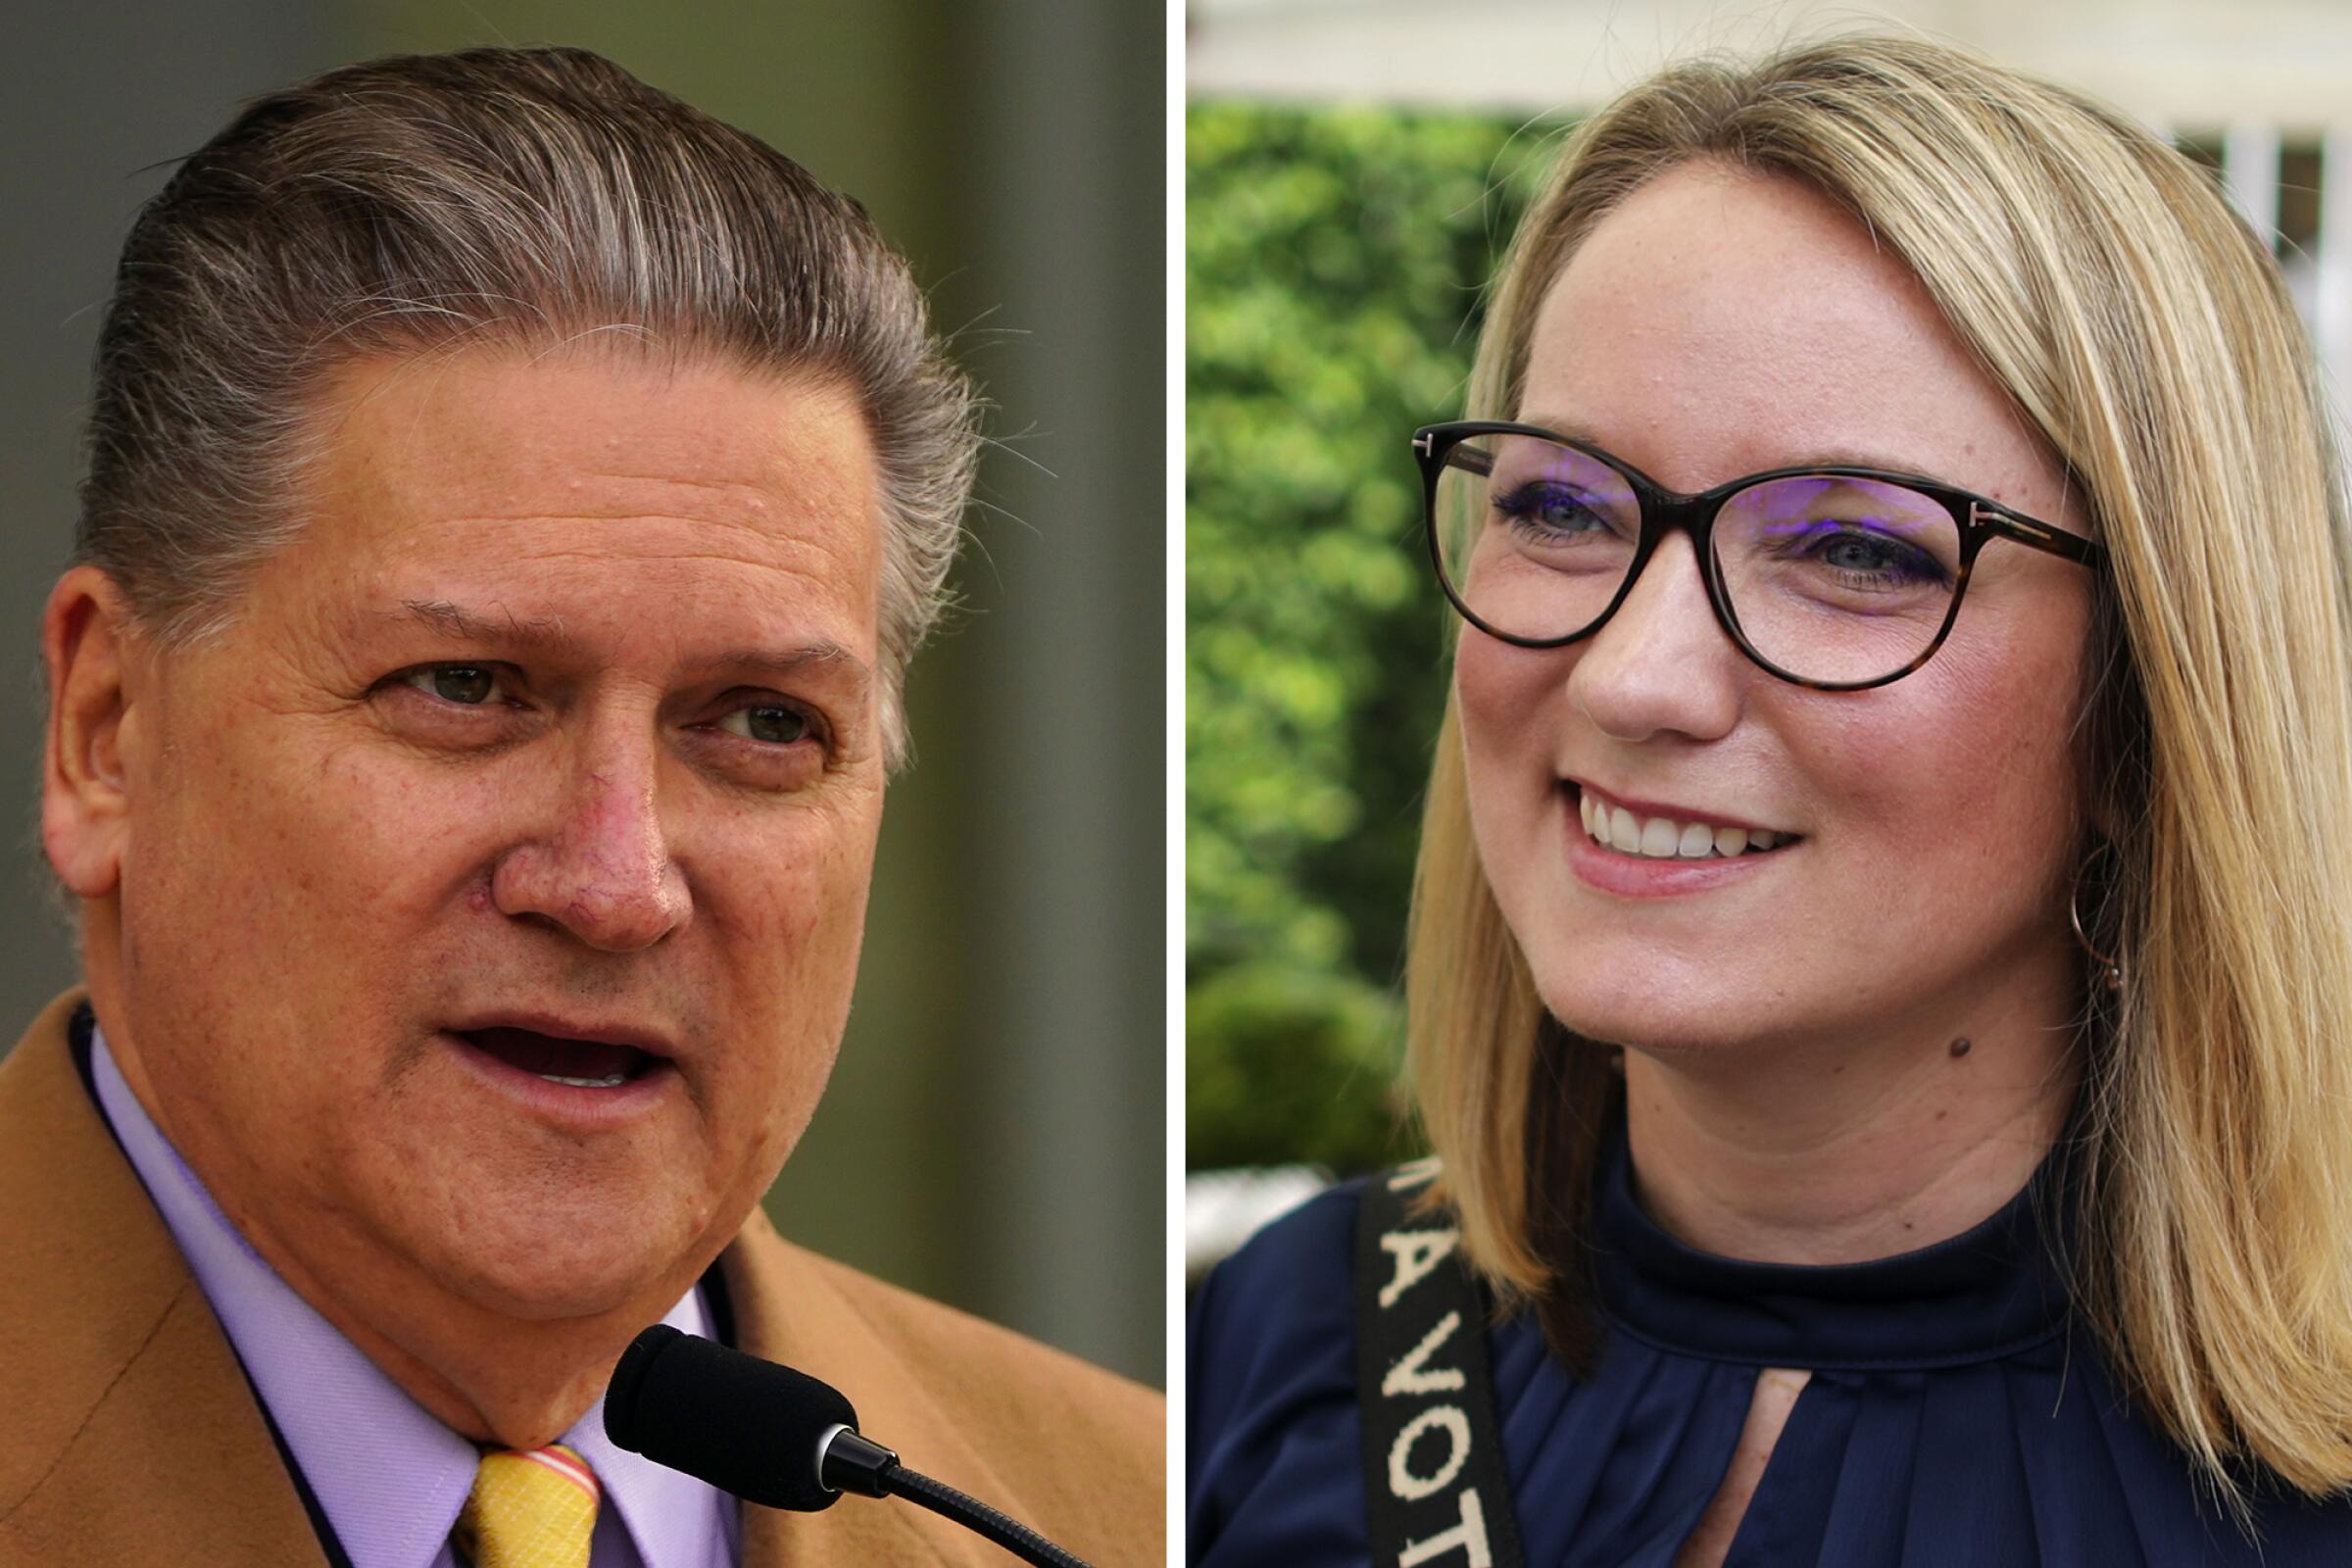 From left; Bob Hertzberg and Lindsey Horvath are headed for a runoff in the Los Angeles County District 3 supervisor's race.